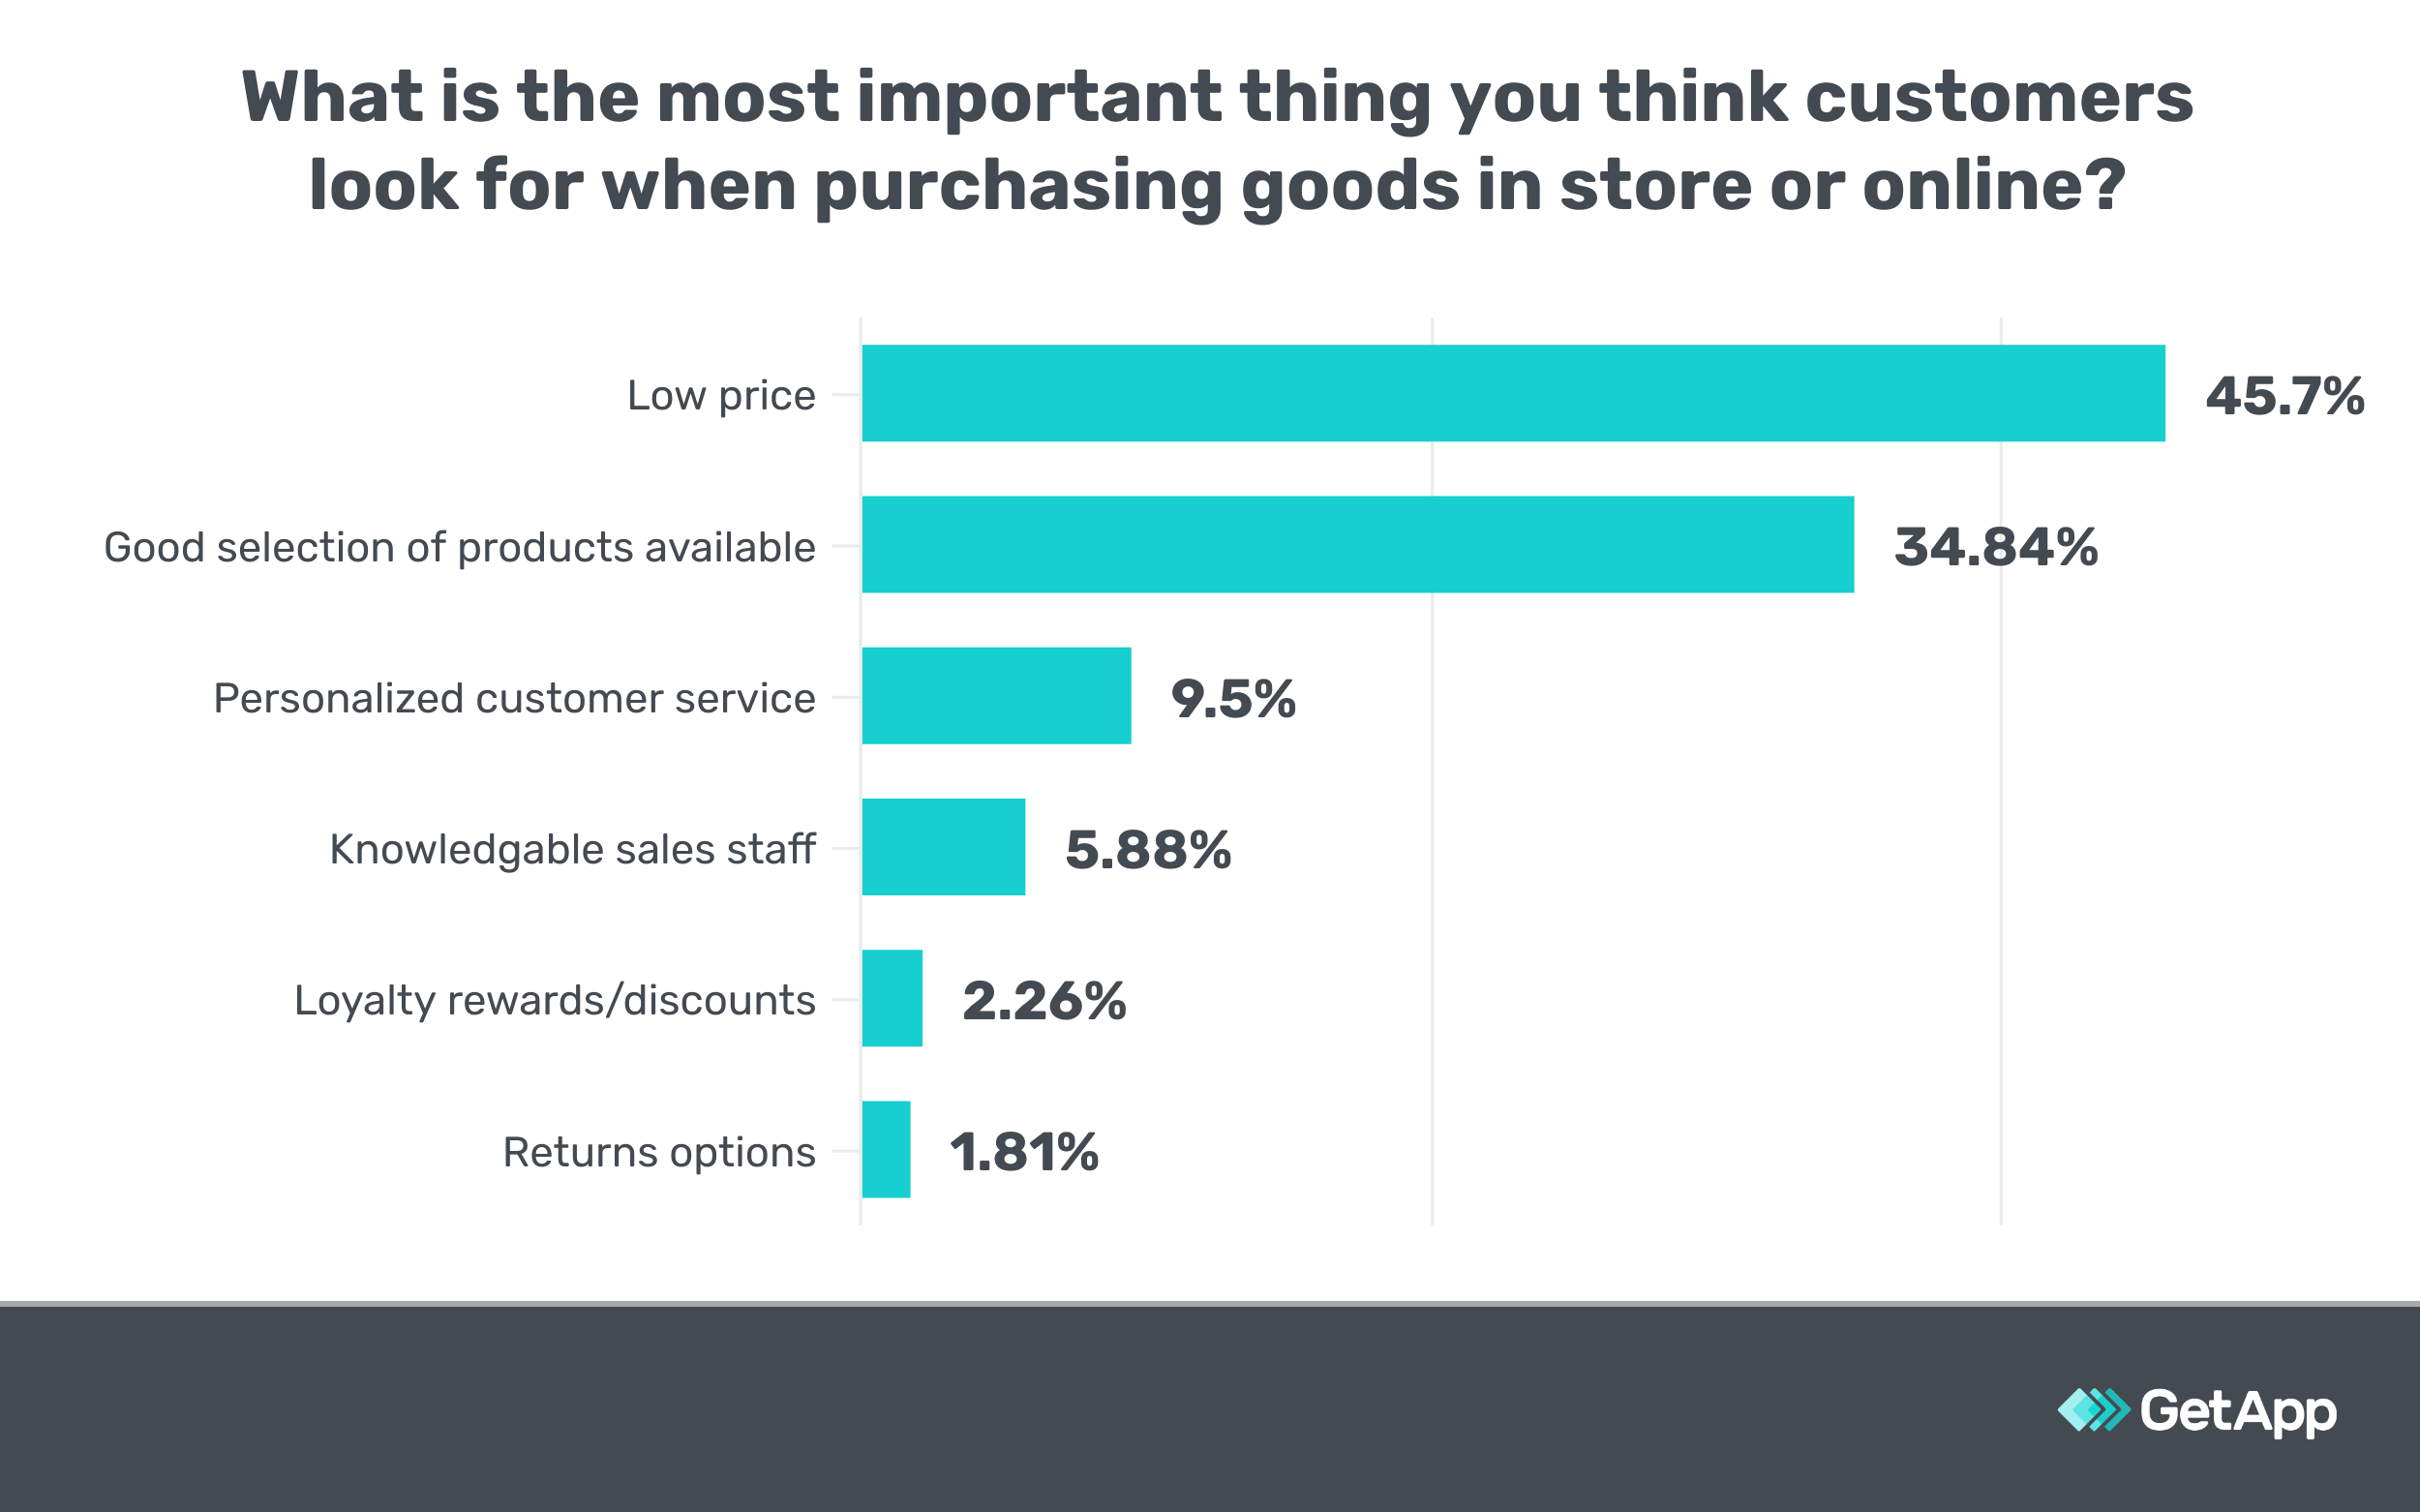 What is the most important thing you think customers look for